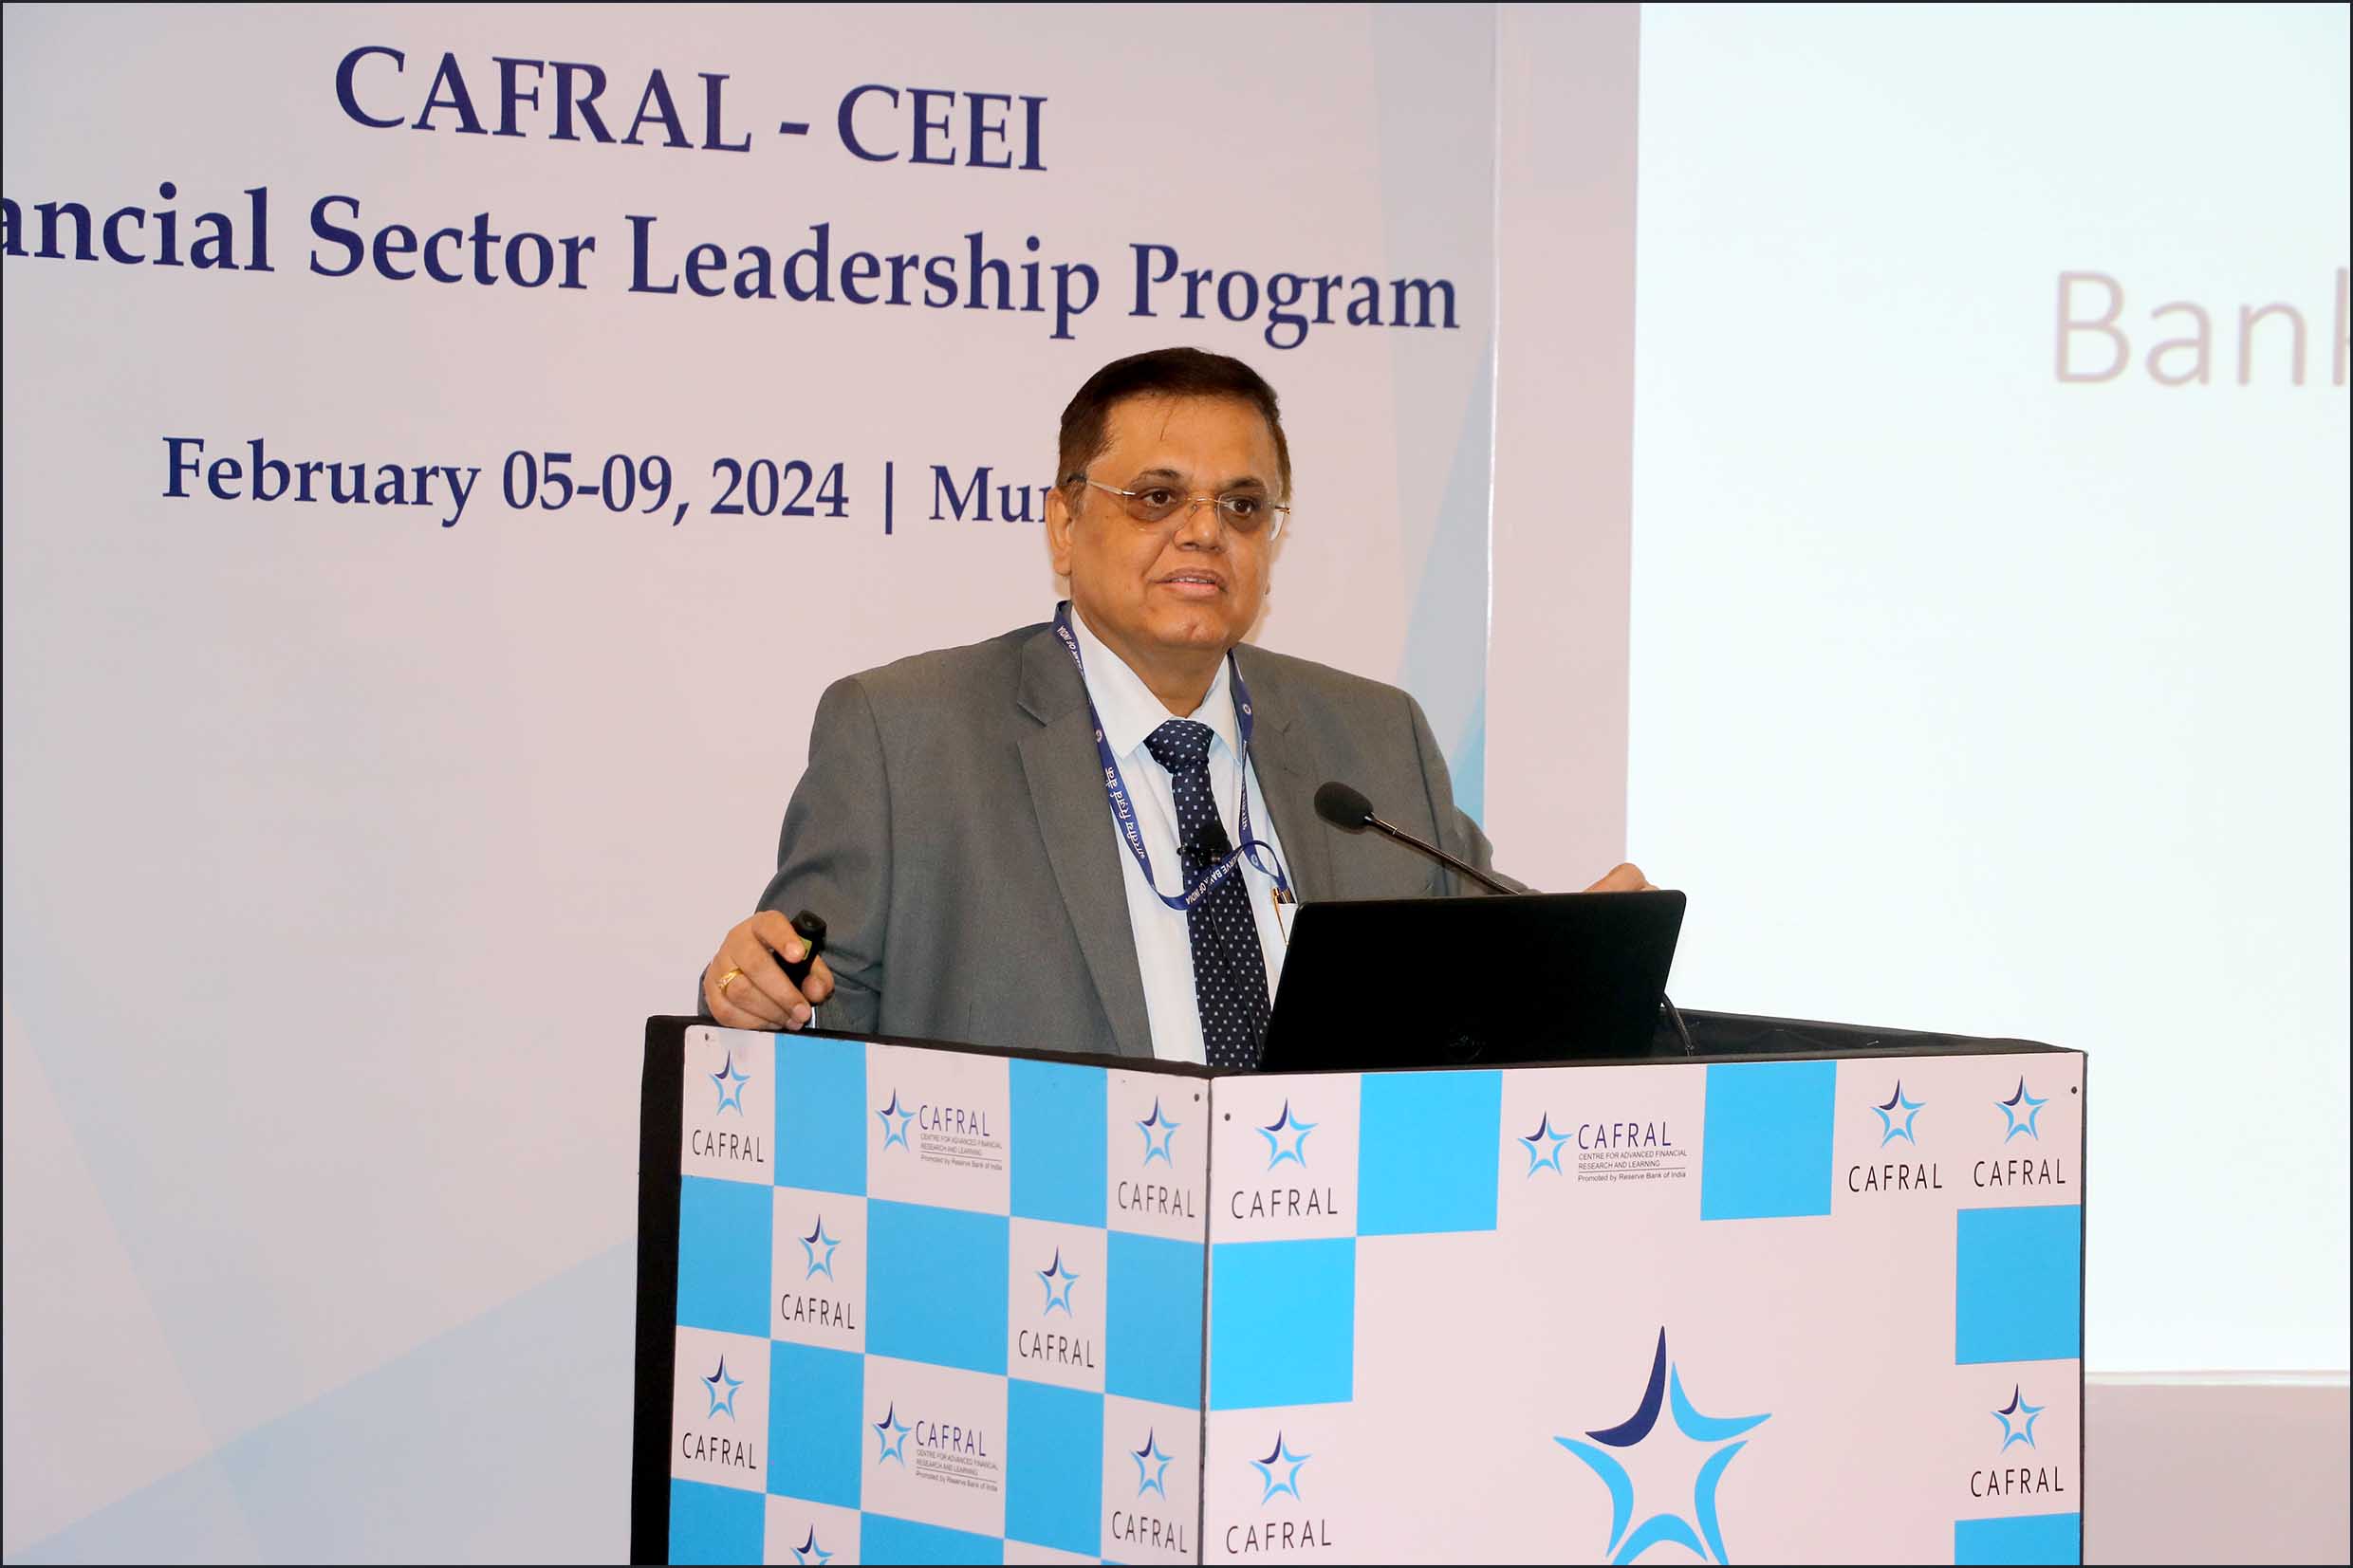 R. Lakshmi Kanth Rao, Chief General Manager-in-Charge, Department of Regulation, Reserve Bank of India